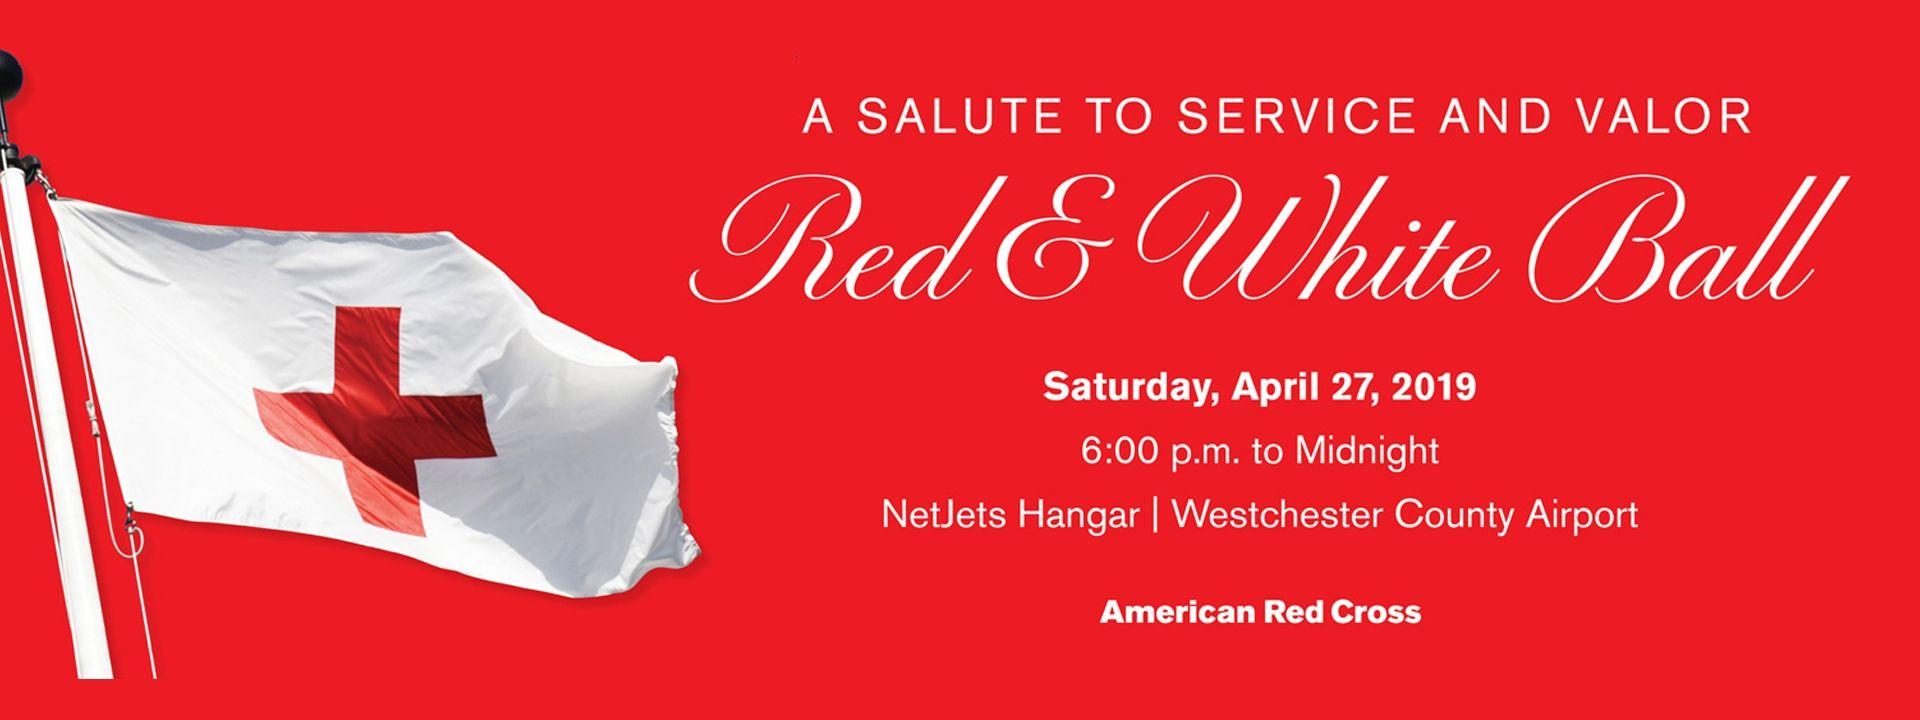 Red and White Ball Logo - Red & White Ball: A Salute to Service and Valor